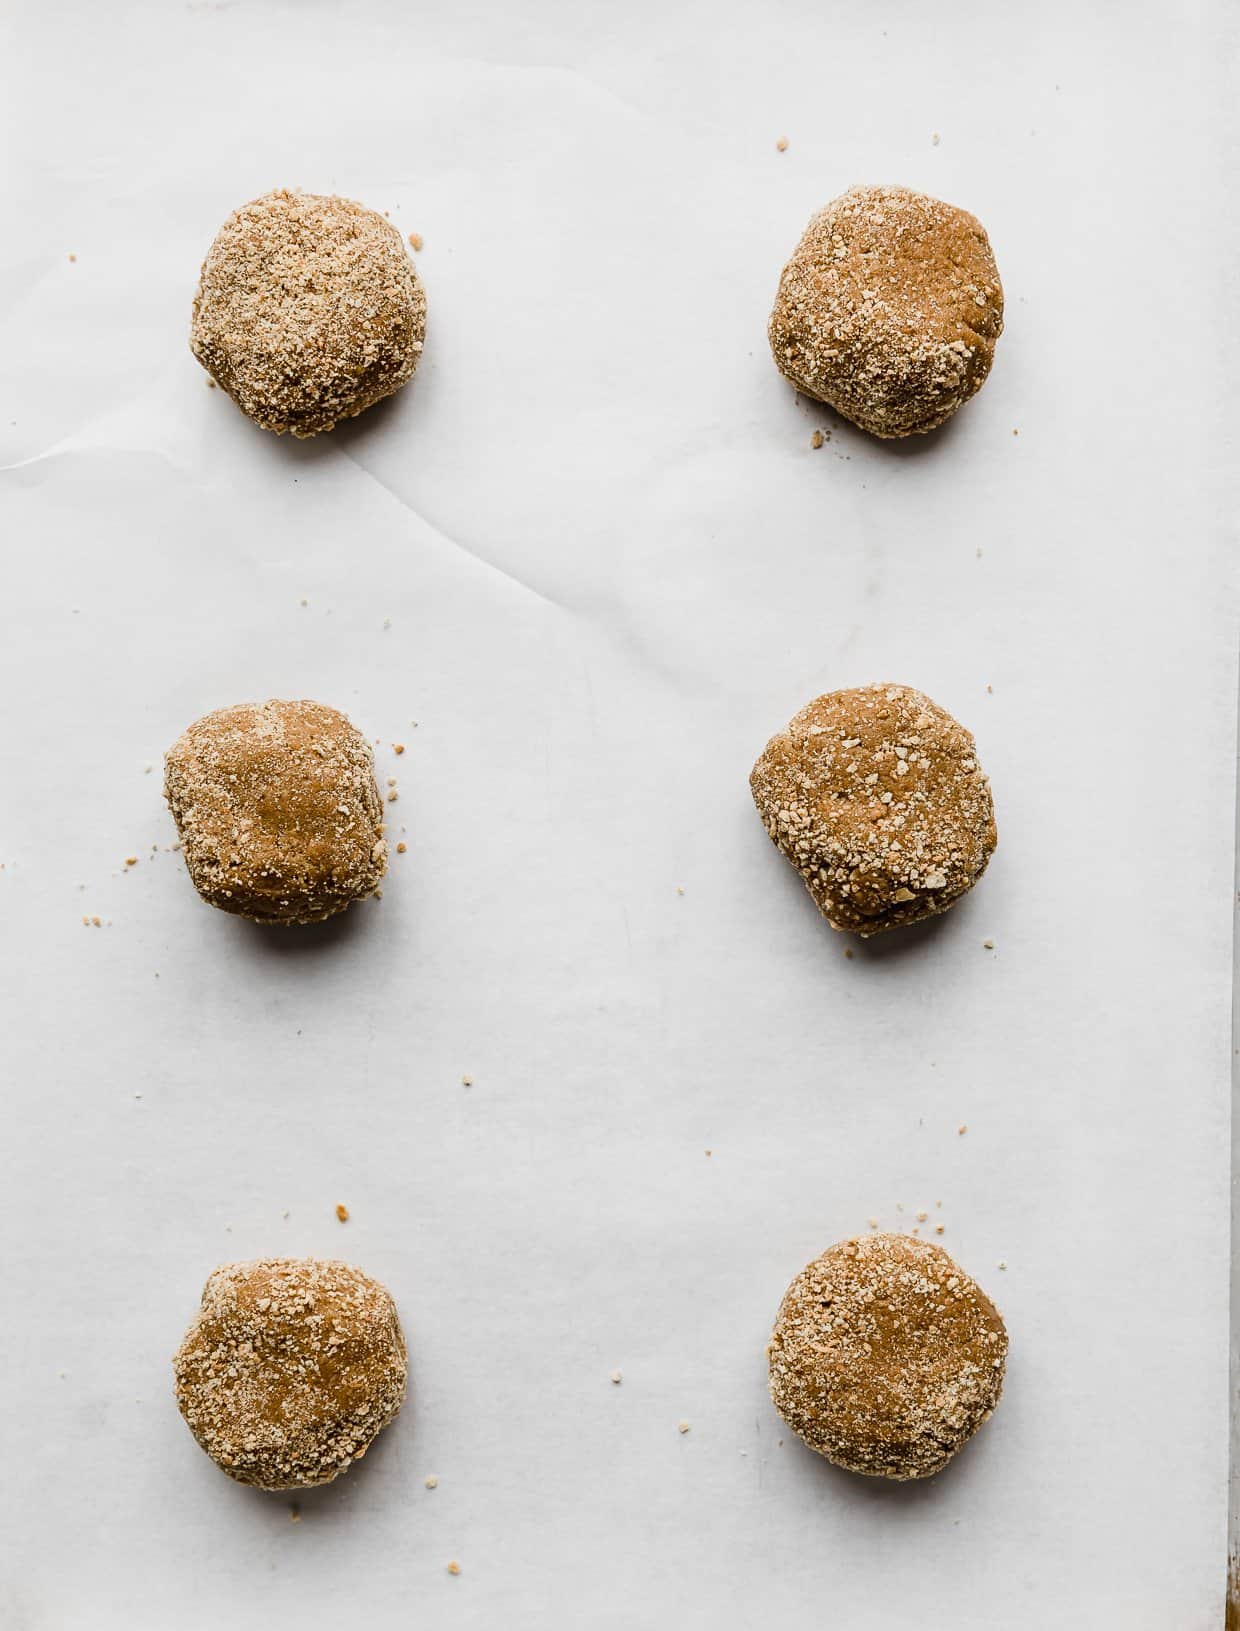 Six Crumbl New York Cheesecake Cookie dough balls on a white parchment paper.